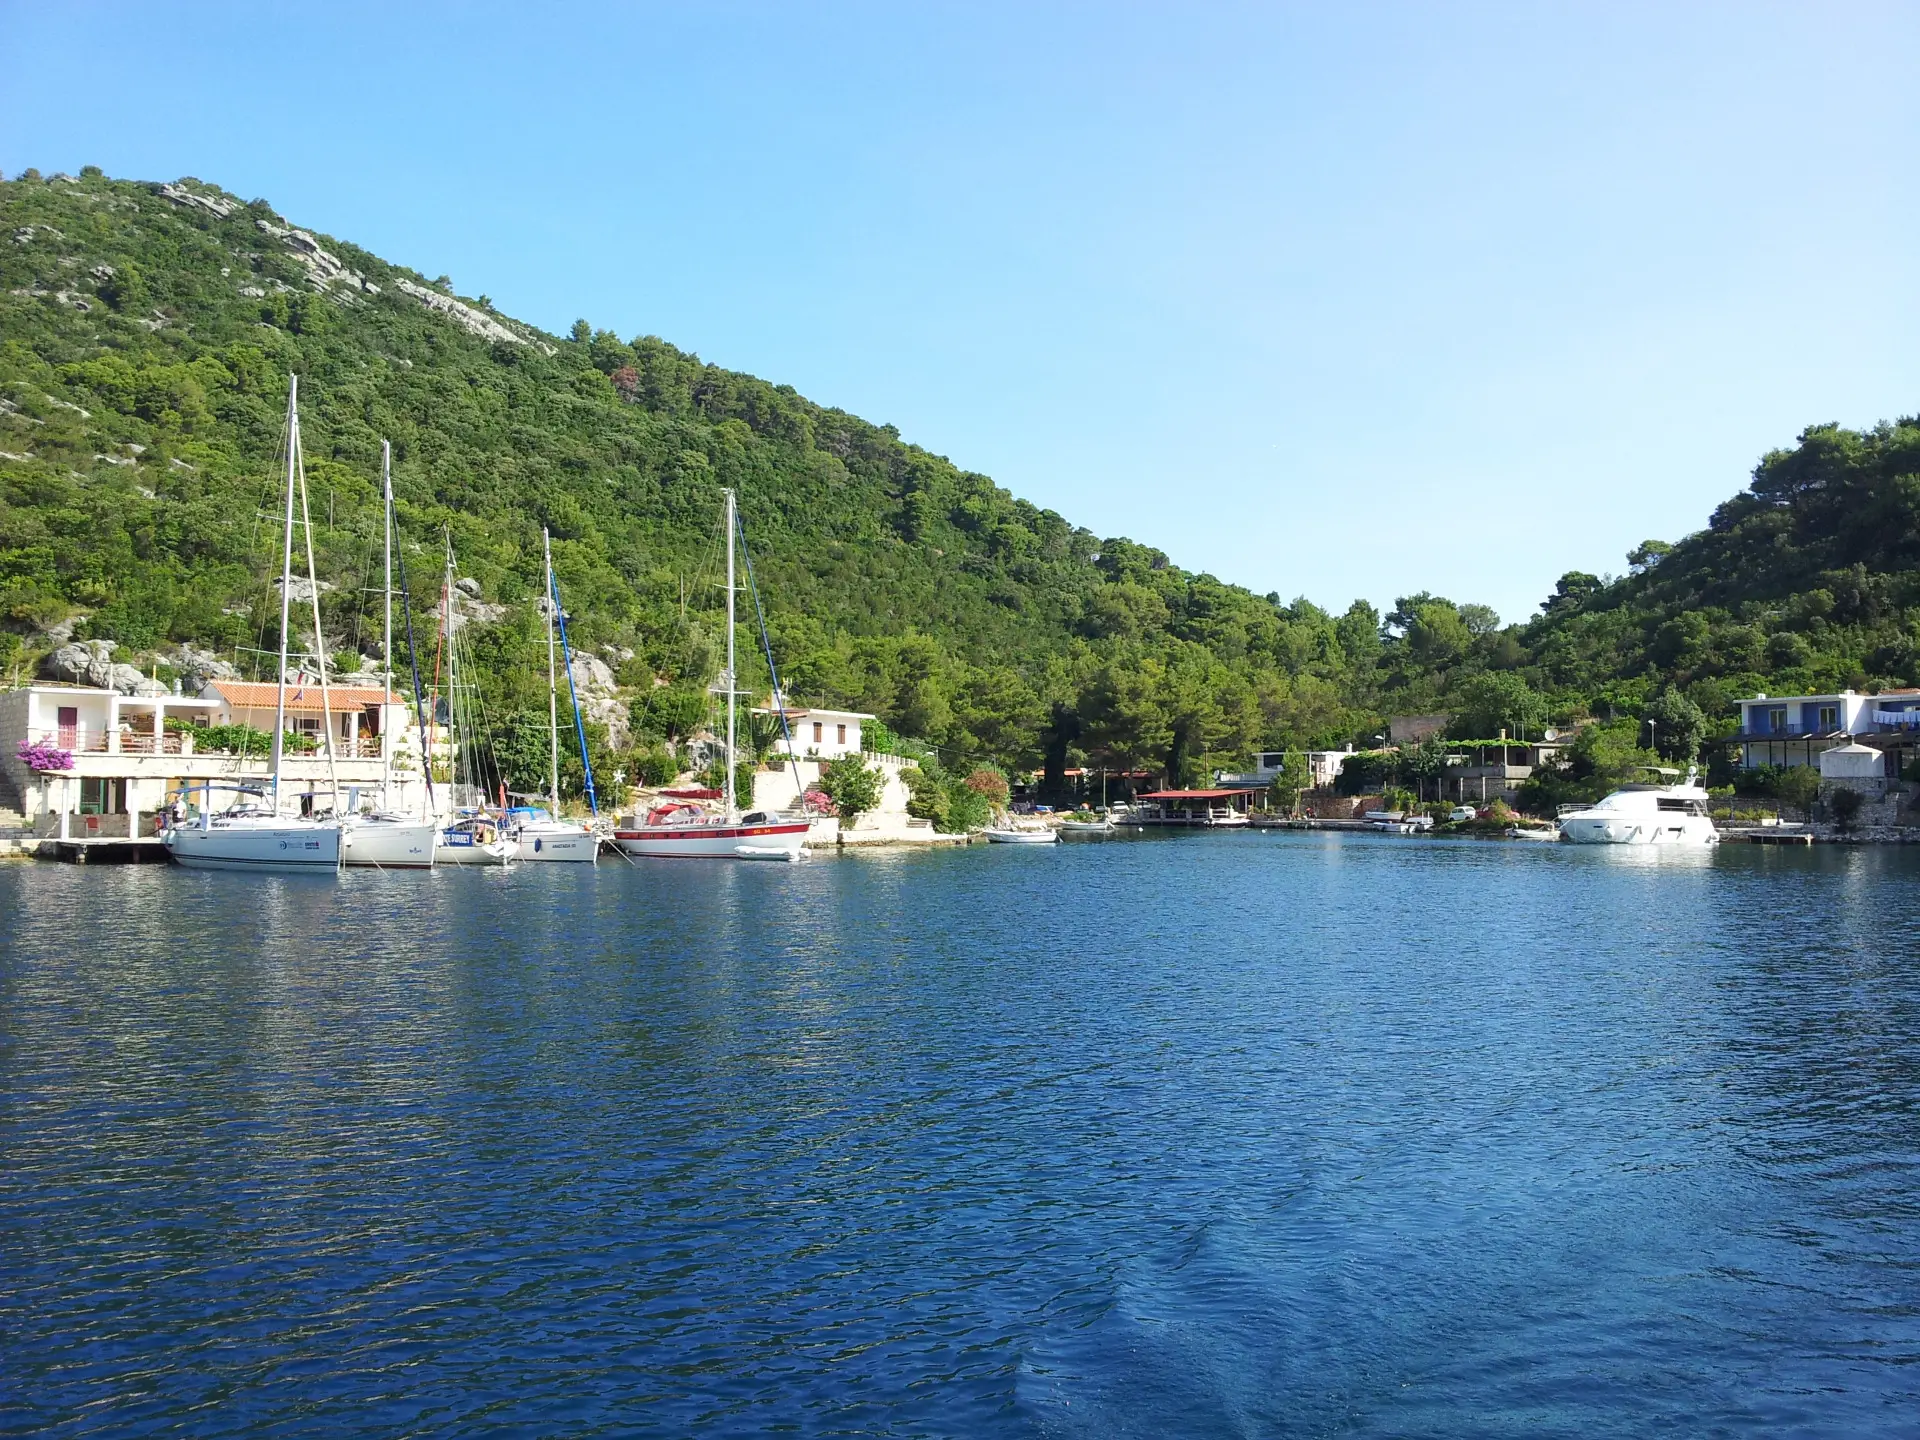 5 beautiful Croatian islands not to miss on a private yacht charter